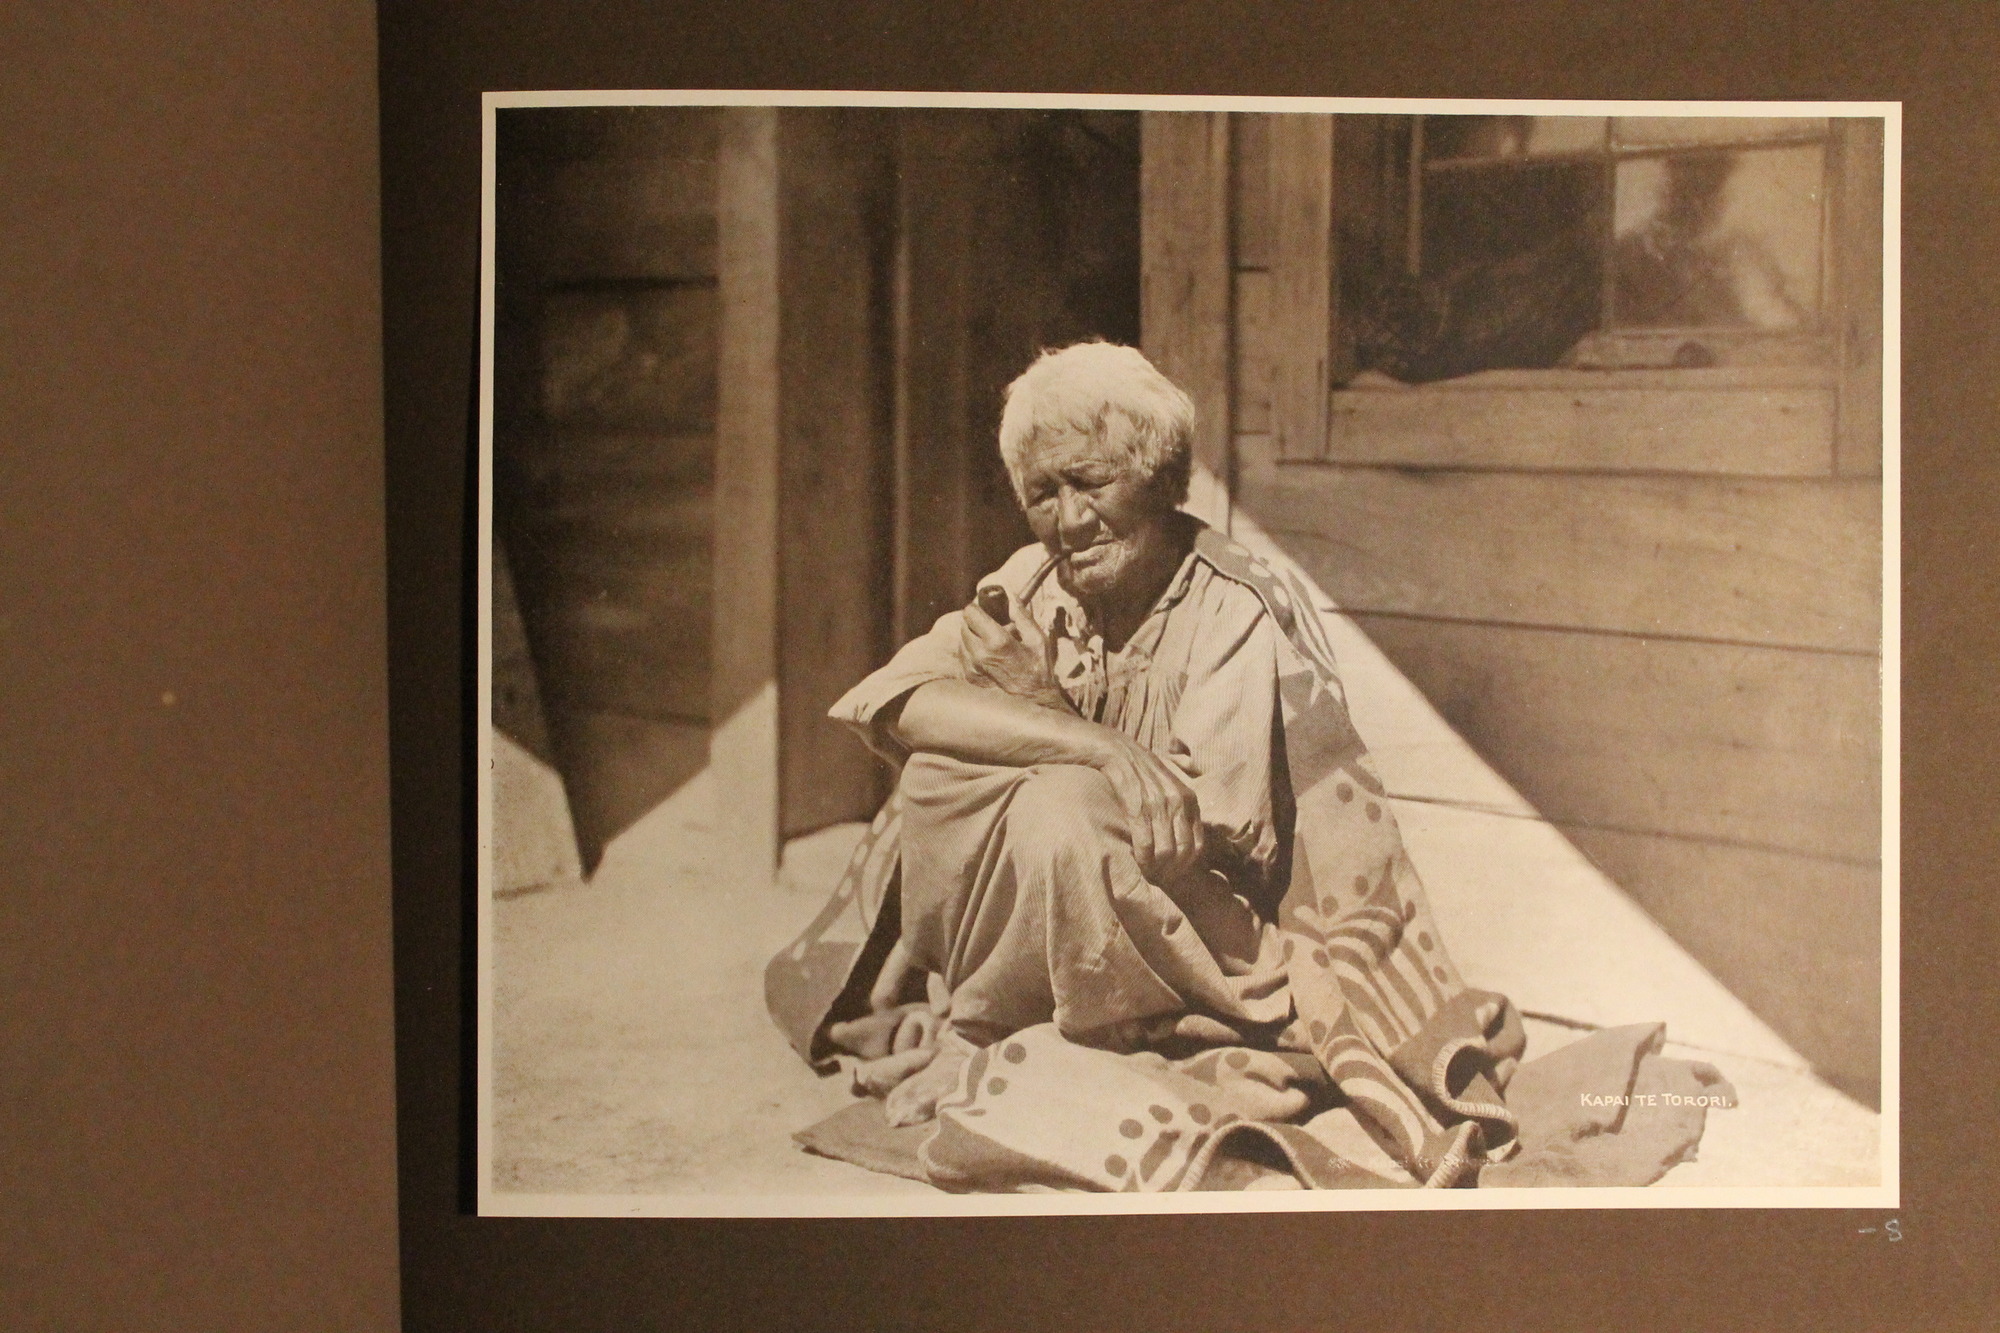 An elderly Maori sits on her heels smoking a pipe in front of the doorway to a wooden house.